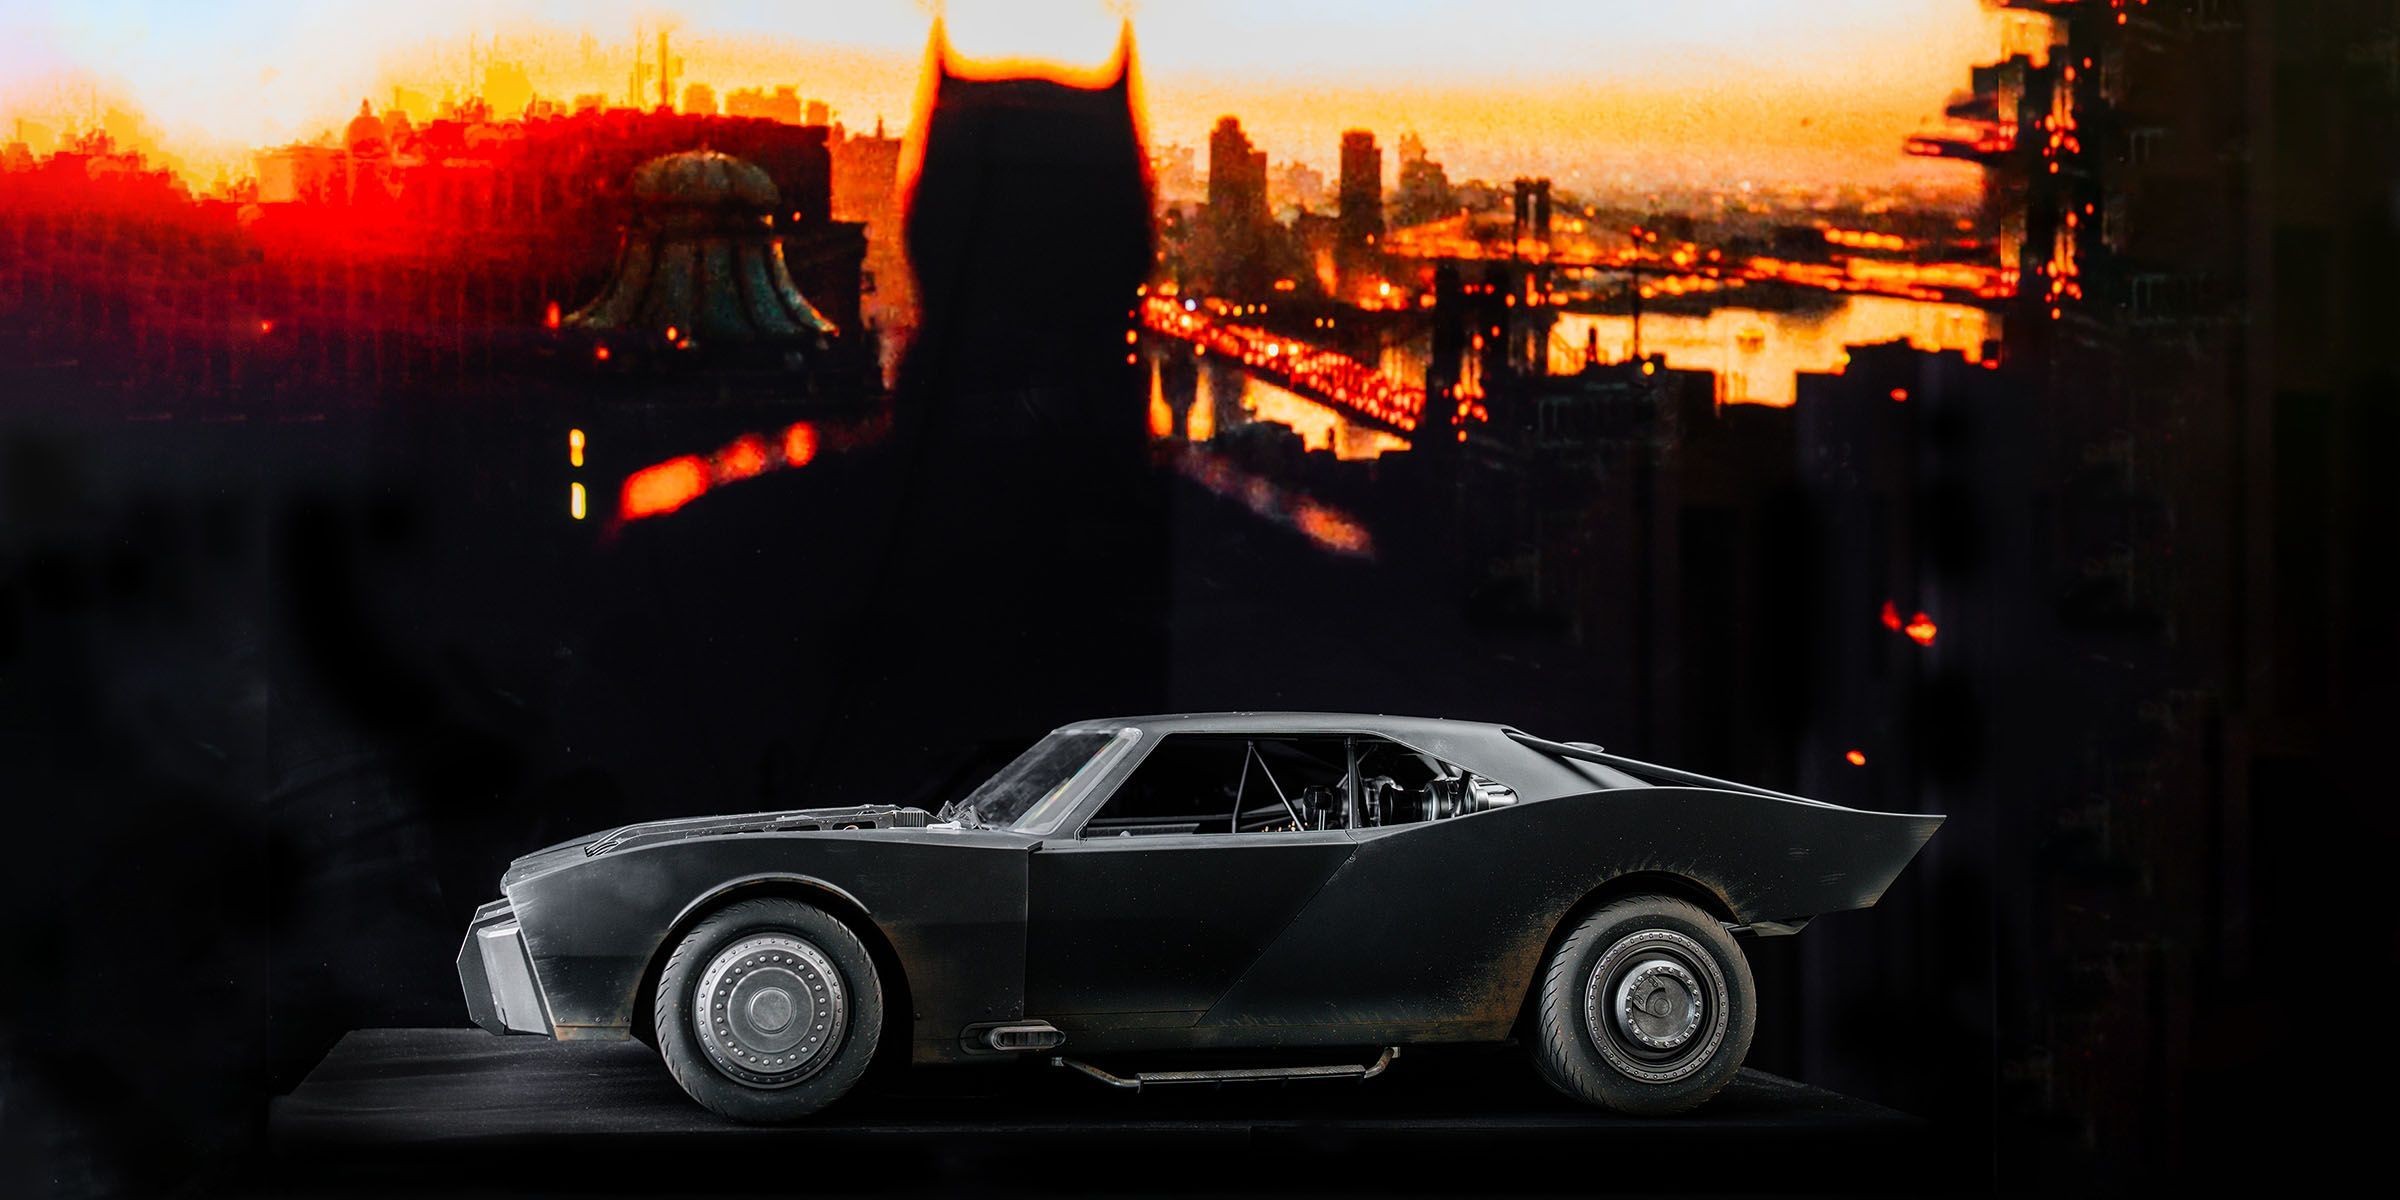 The Batman Batmobile (Weathered Version) 1/6 Scale Limited Edition Collectible Vehicle